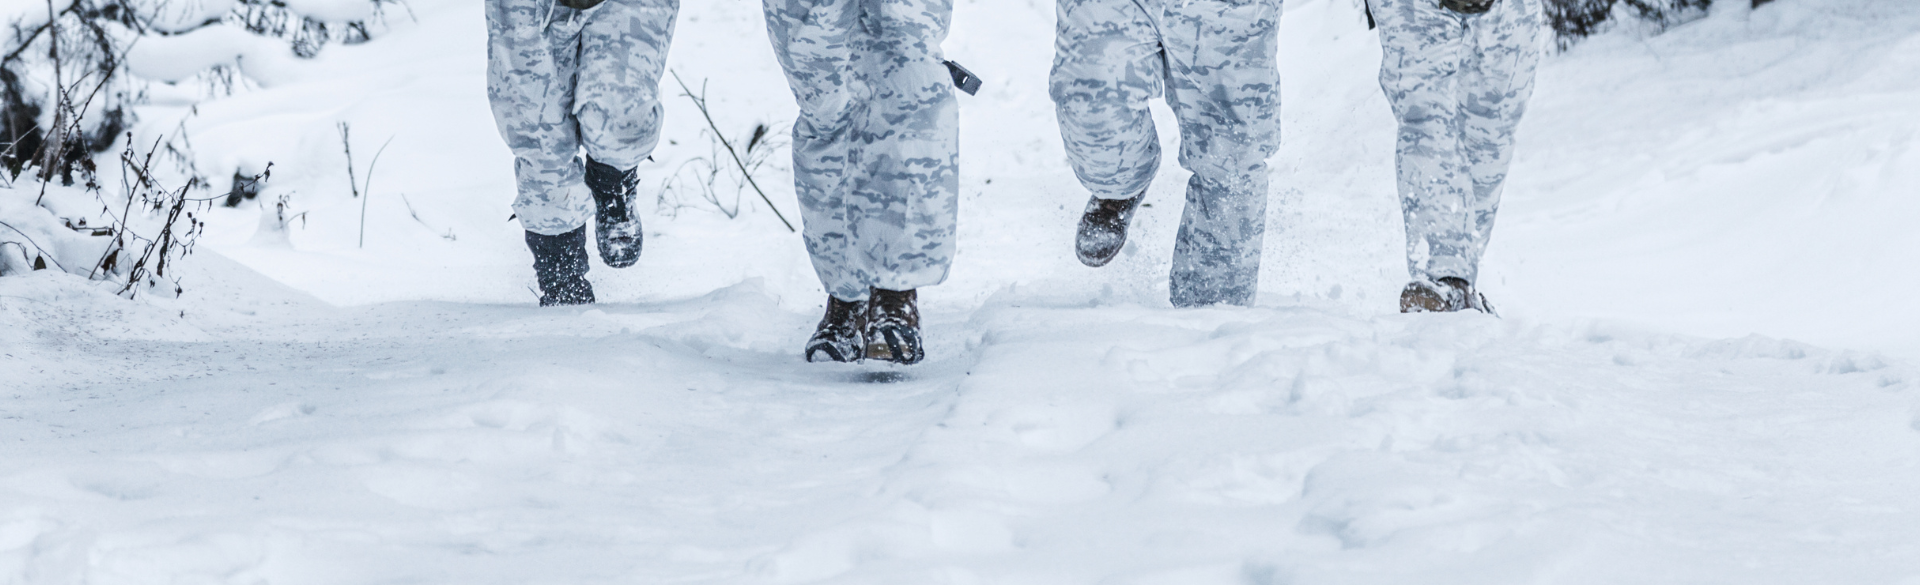 Image of soldiers' feet running through snow